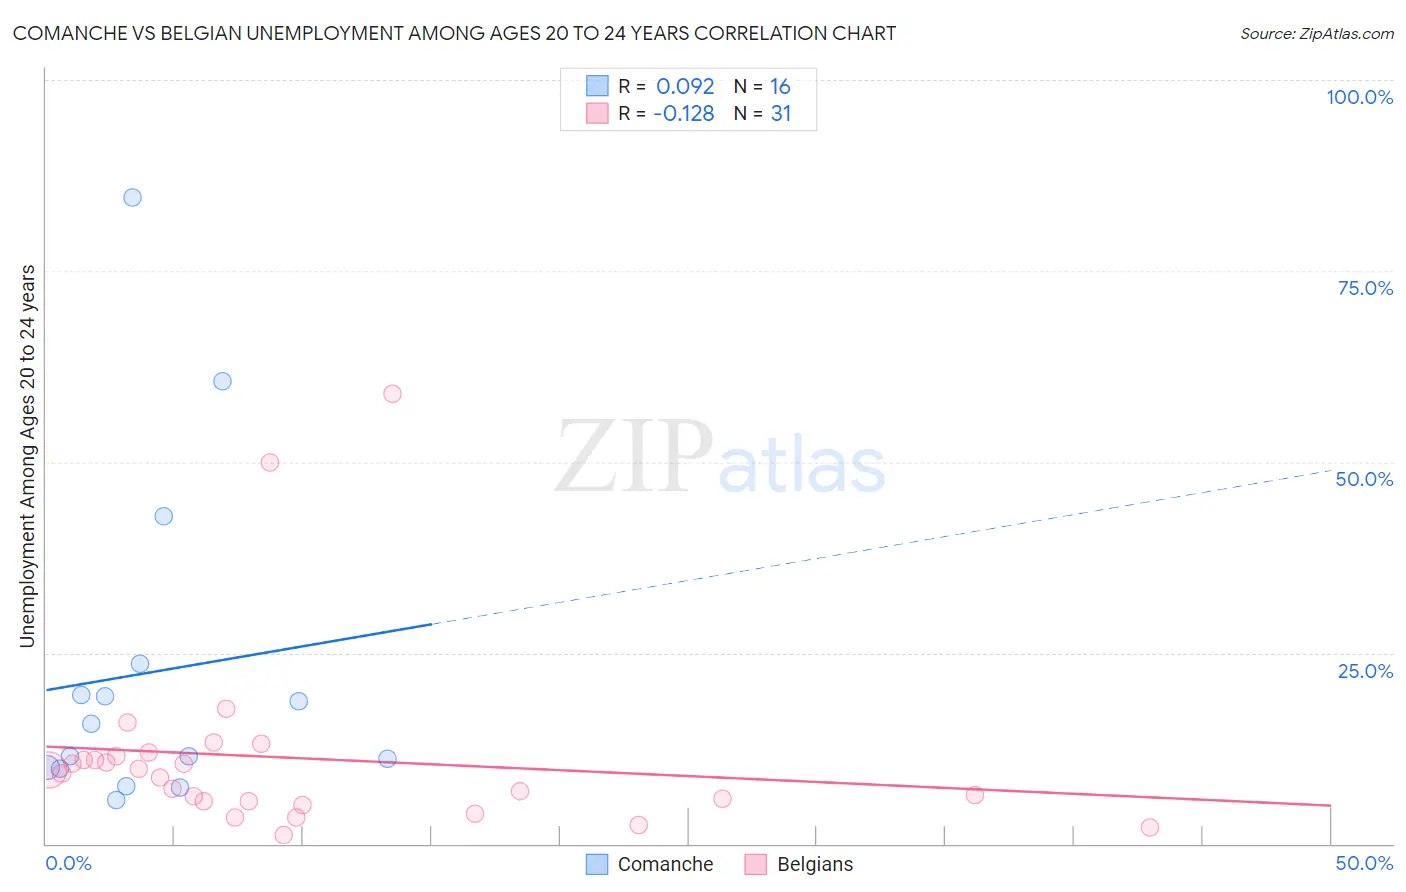 Comanche vs Belgian Unemployment Among Ages 20 to 24 years